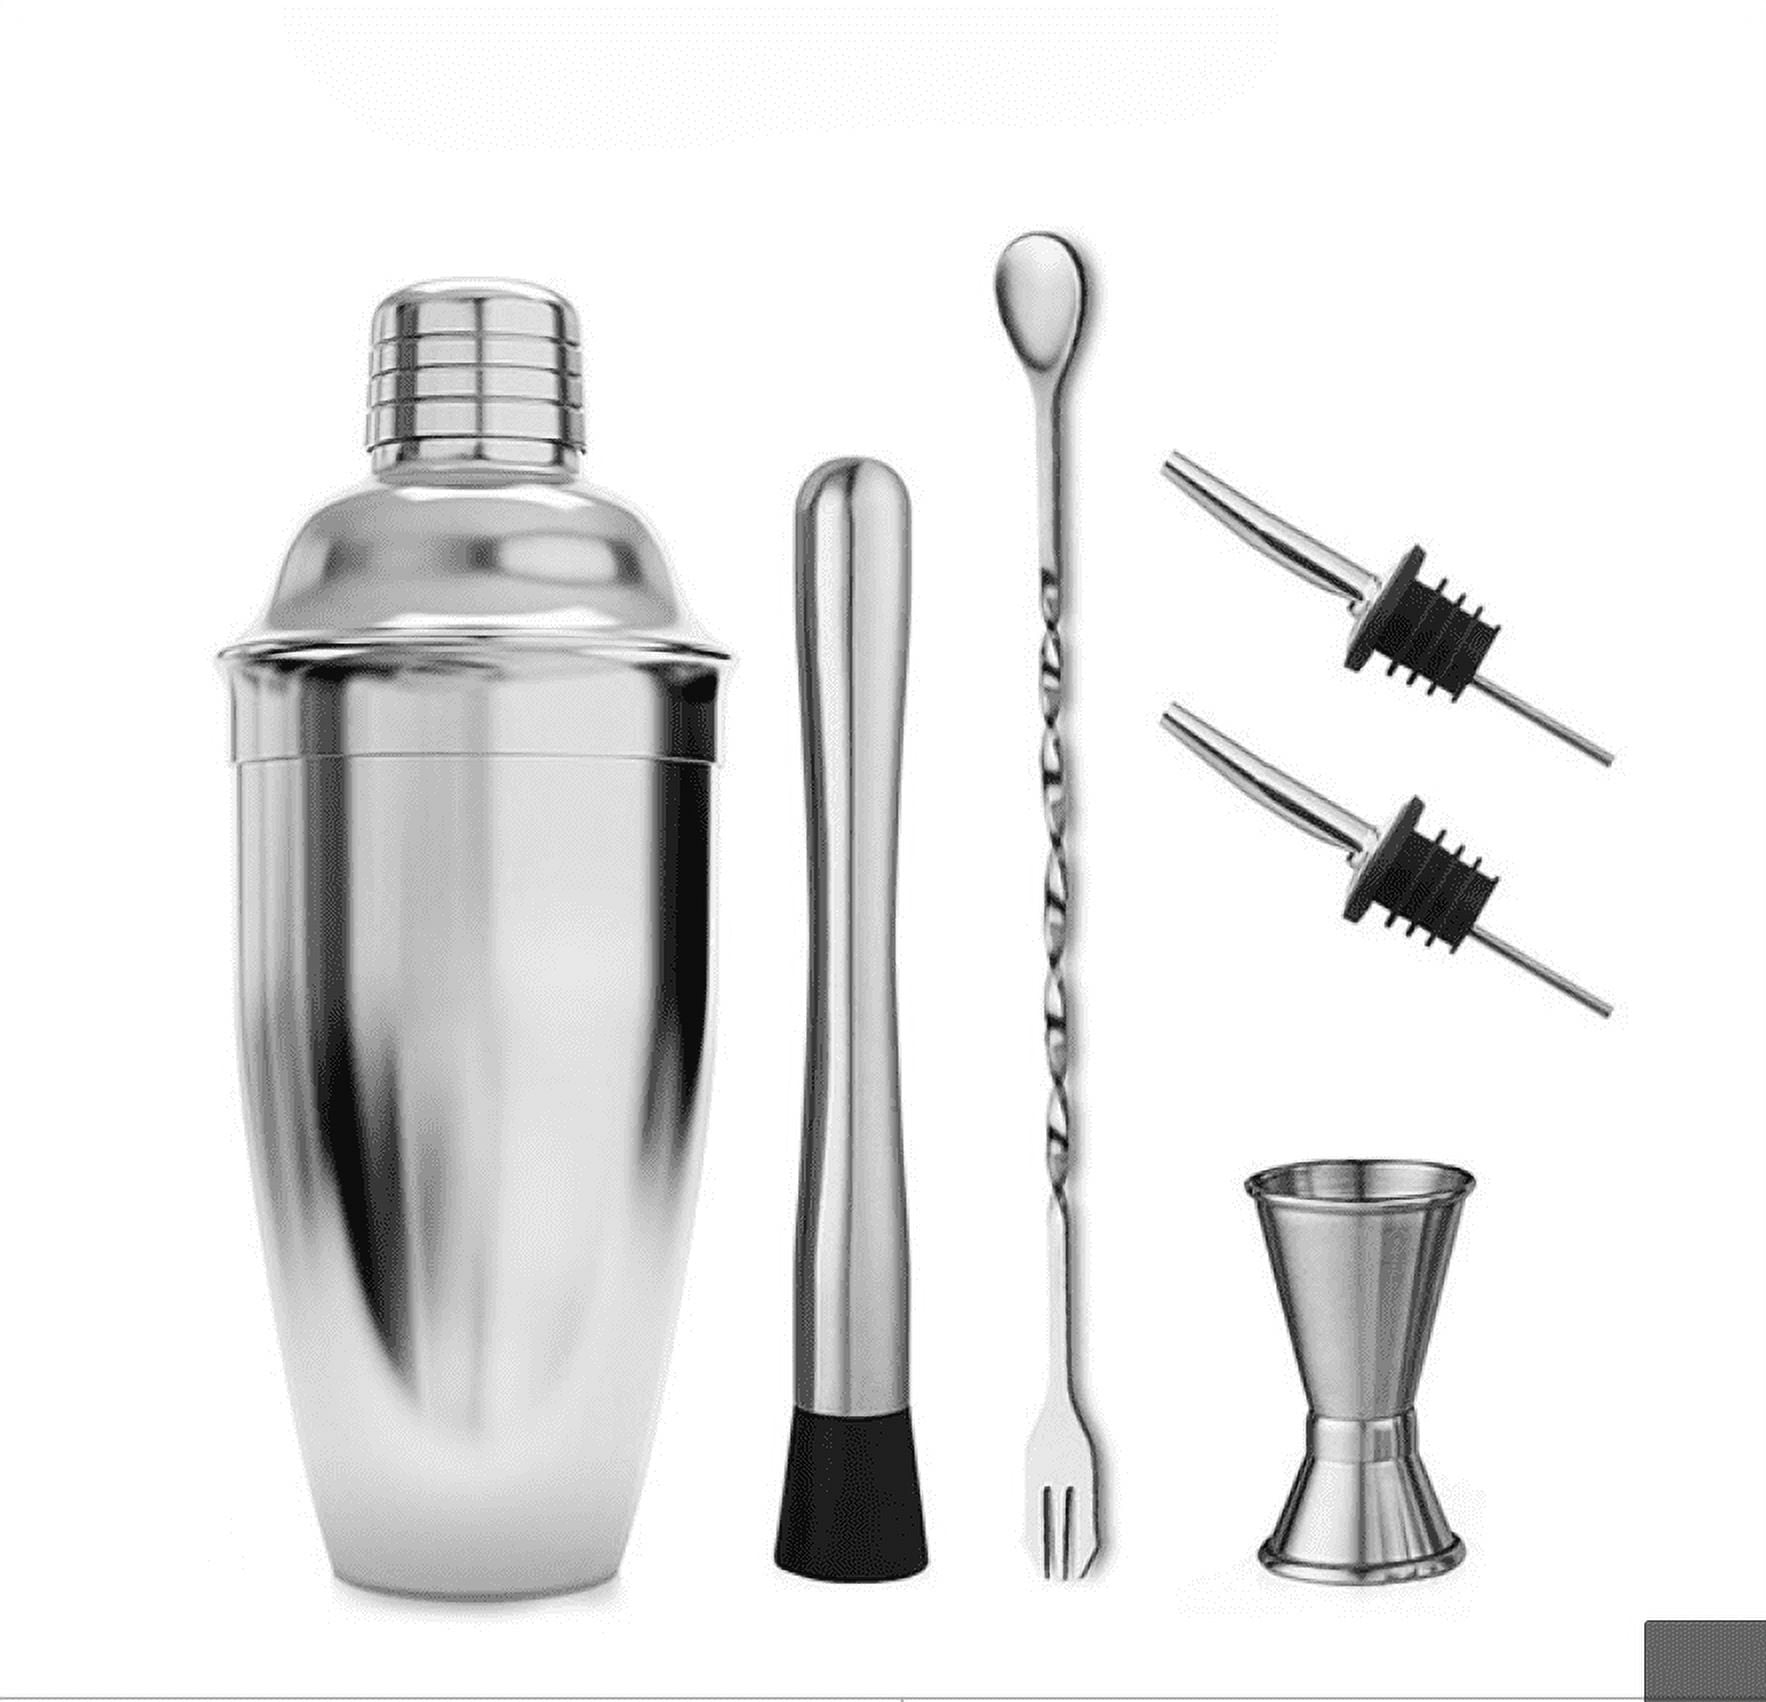 24 Ounce Cocktail Shaker Bar Set with Accessories - Martini Kit